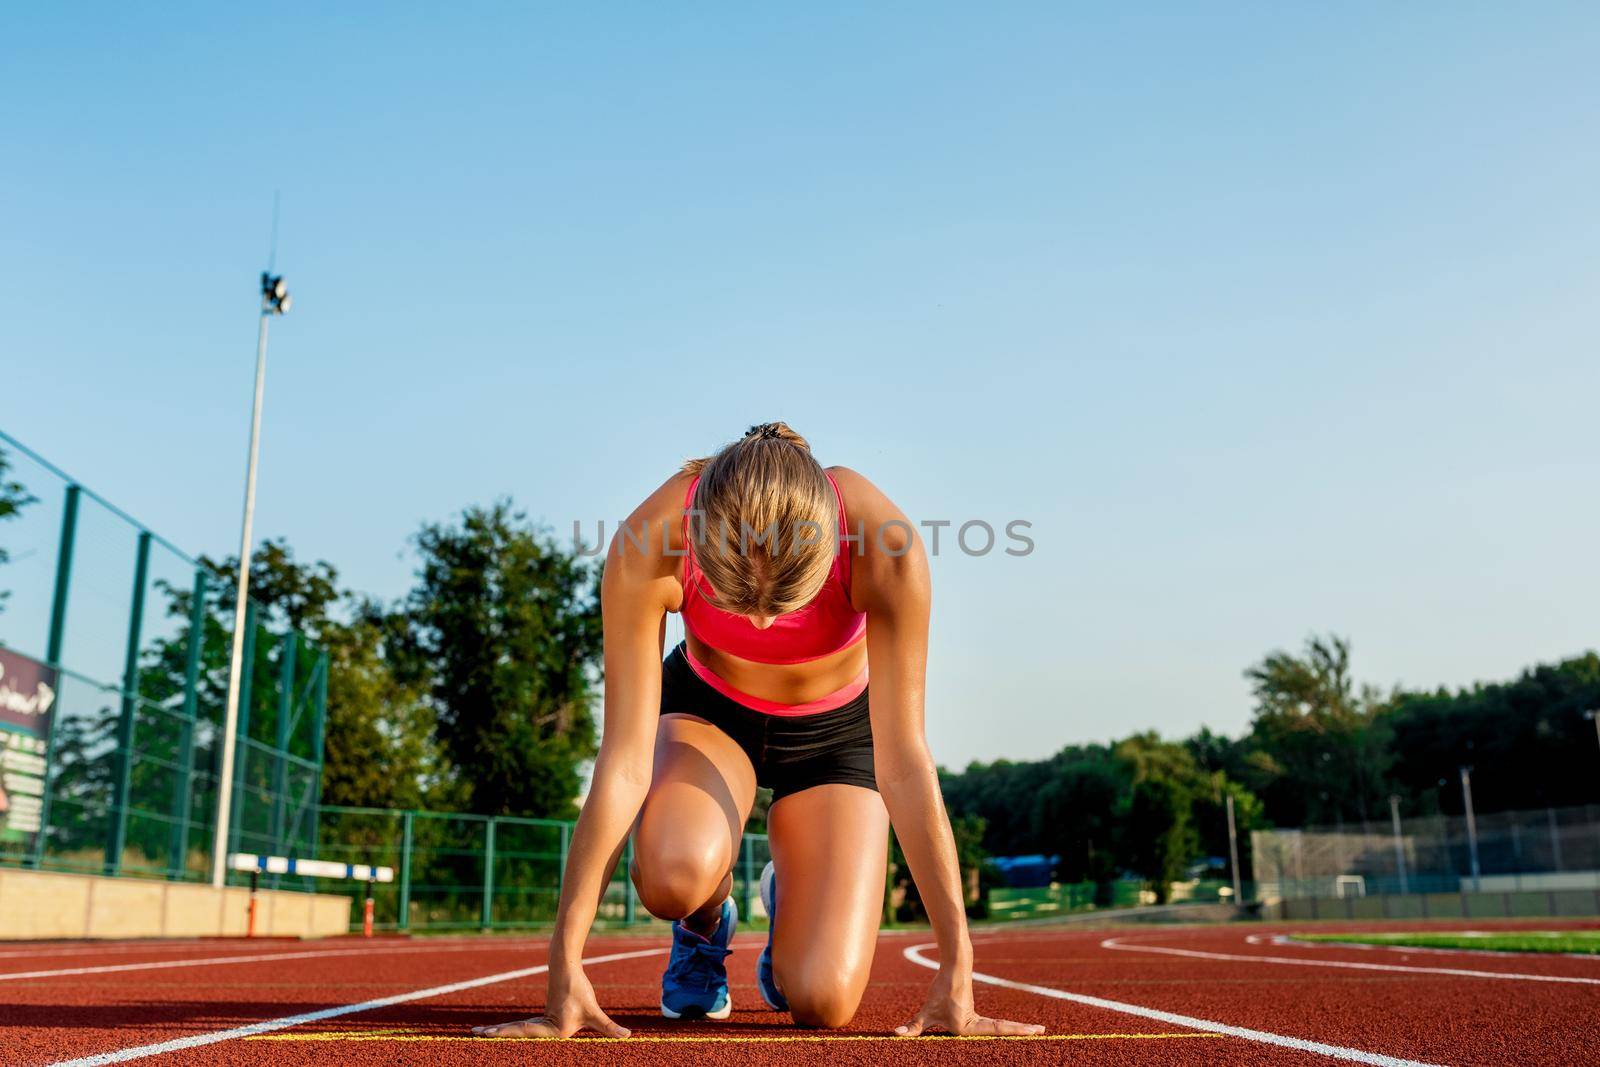 Young woman athlete at starting position ready to start a race. Female sprinter ready for sports exercise on racetrack.